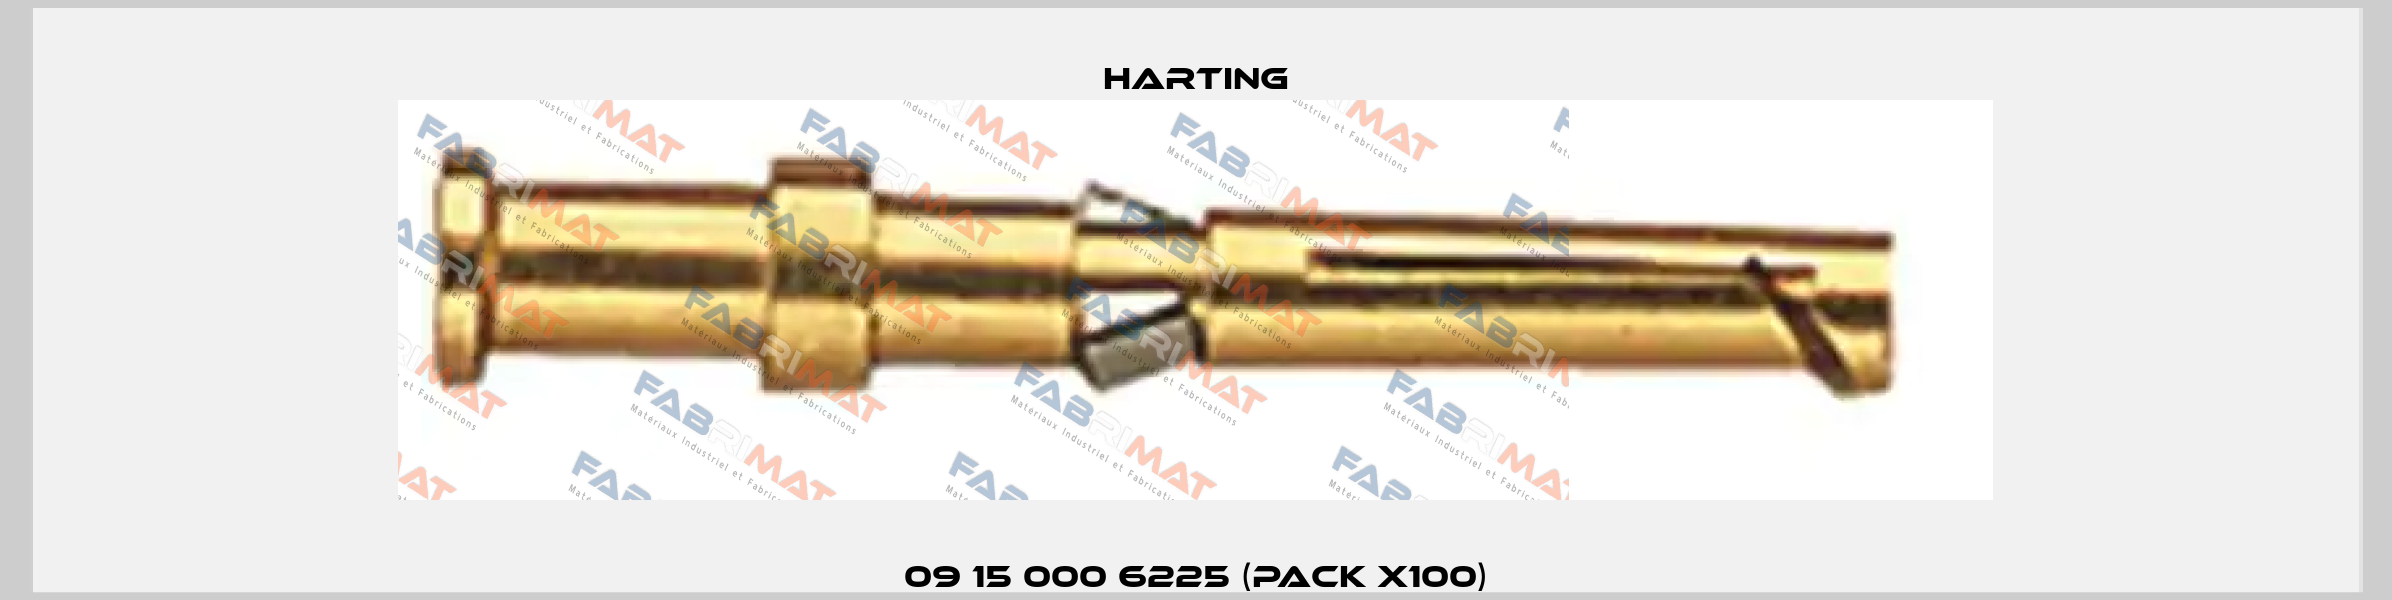 09 15 000 6225 (pack x100) Harting